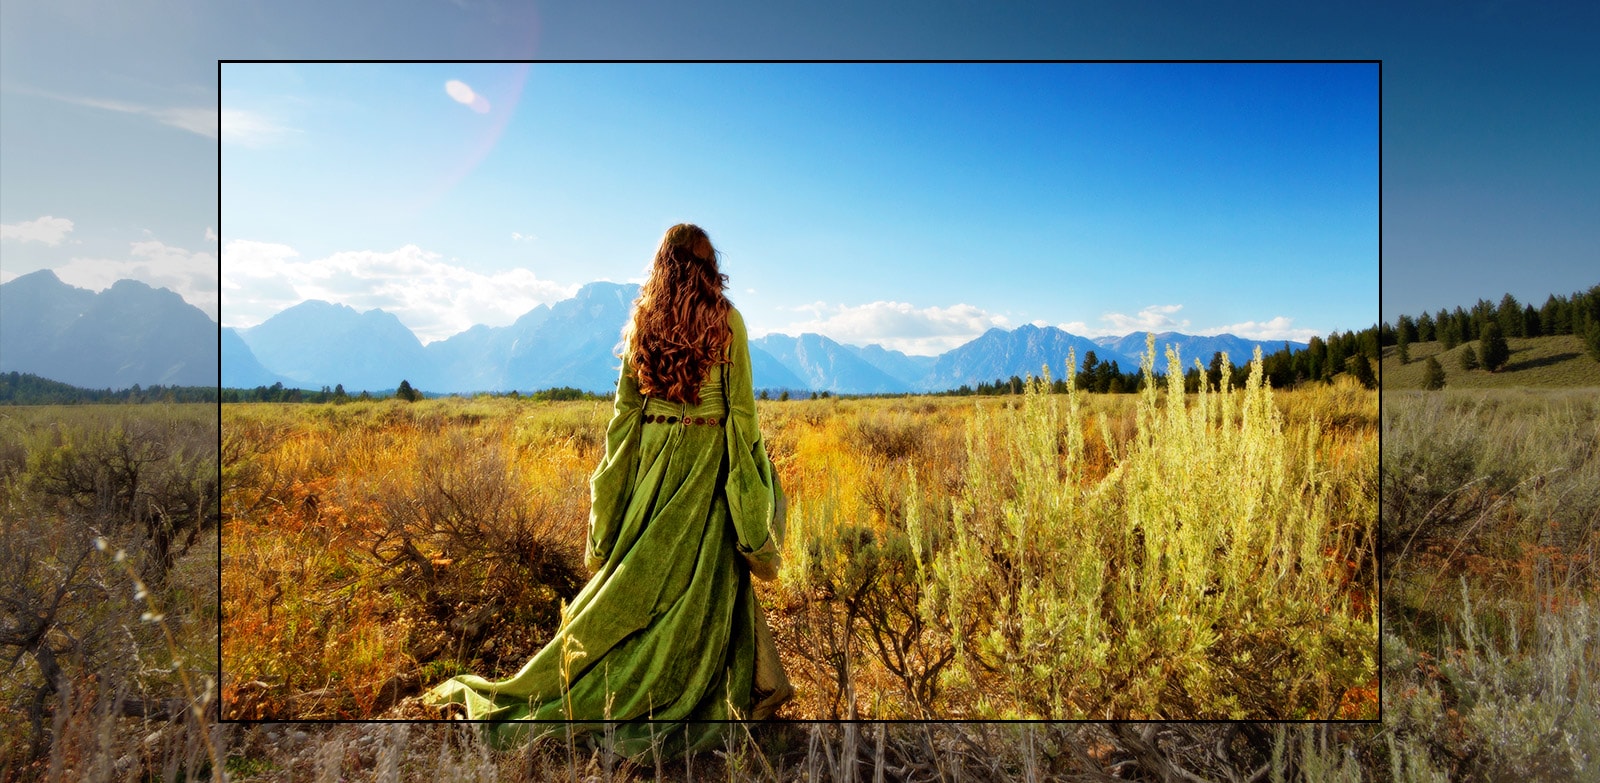 A TV screen showing a scene from a fantasy movie with a woman standing in the fields facing the mountains.